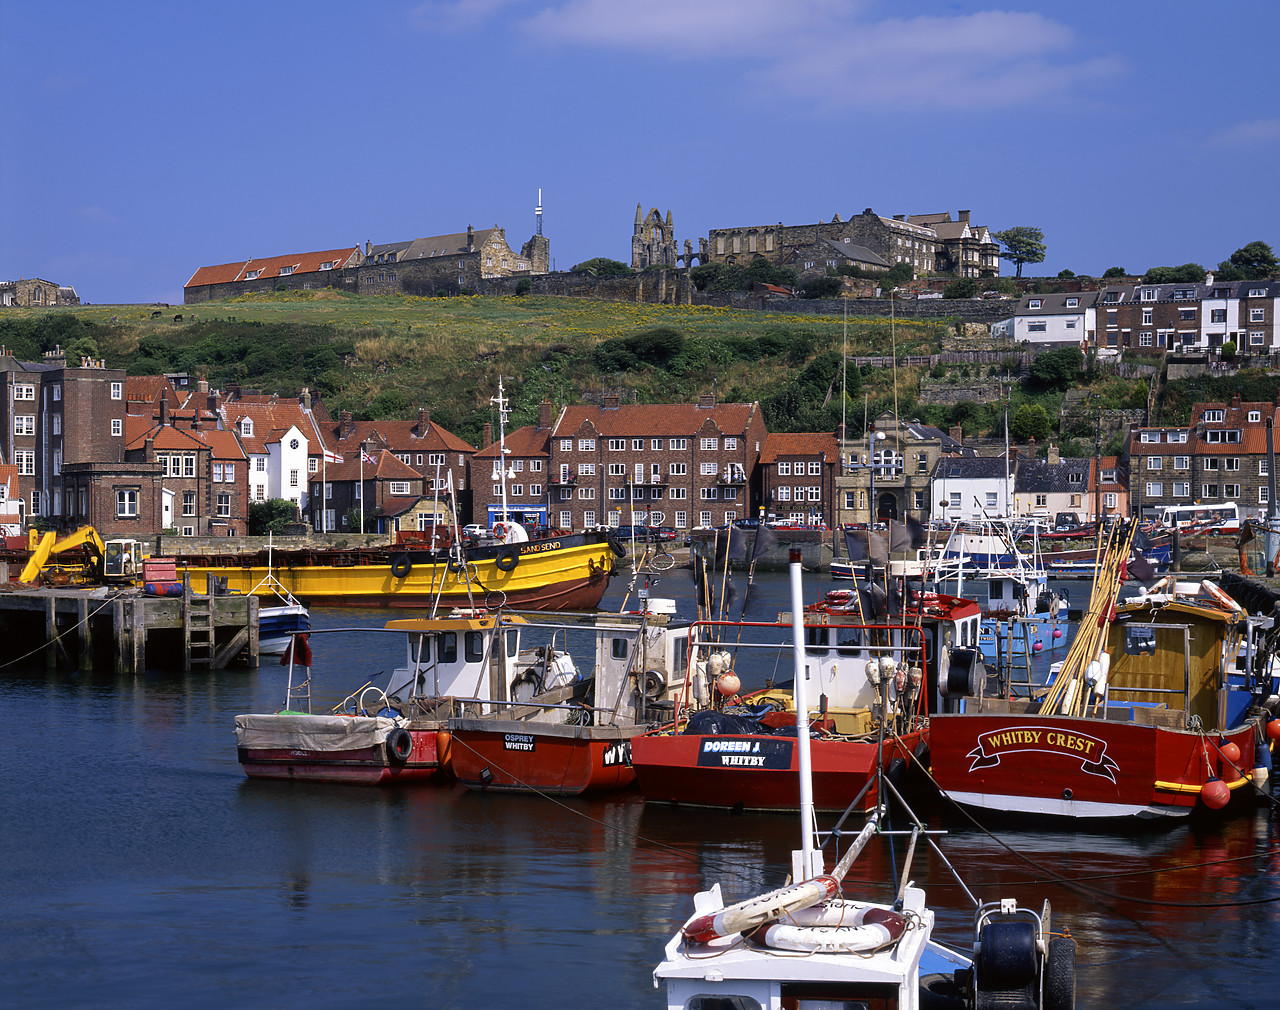 #980988-4 - Whitby Harbour, North Yorkshire, England